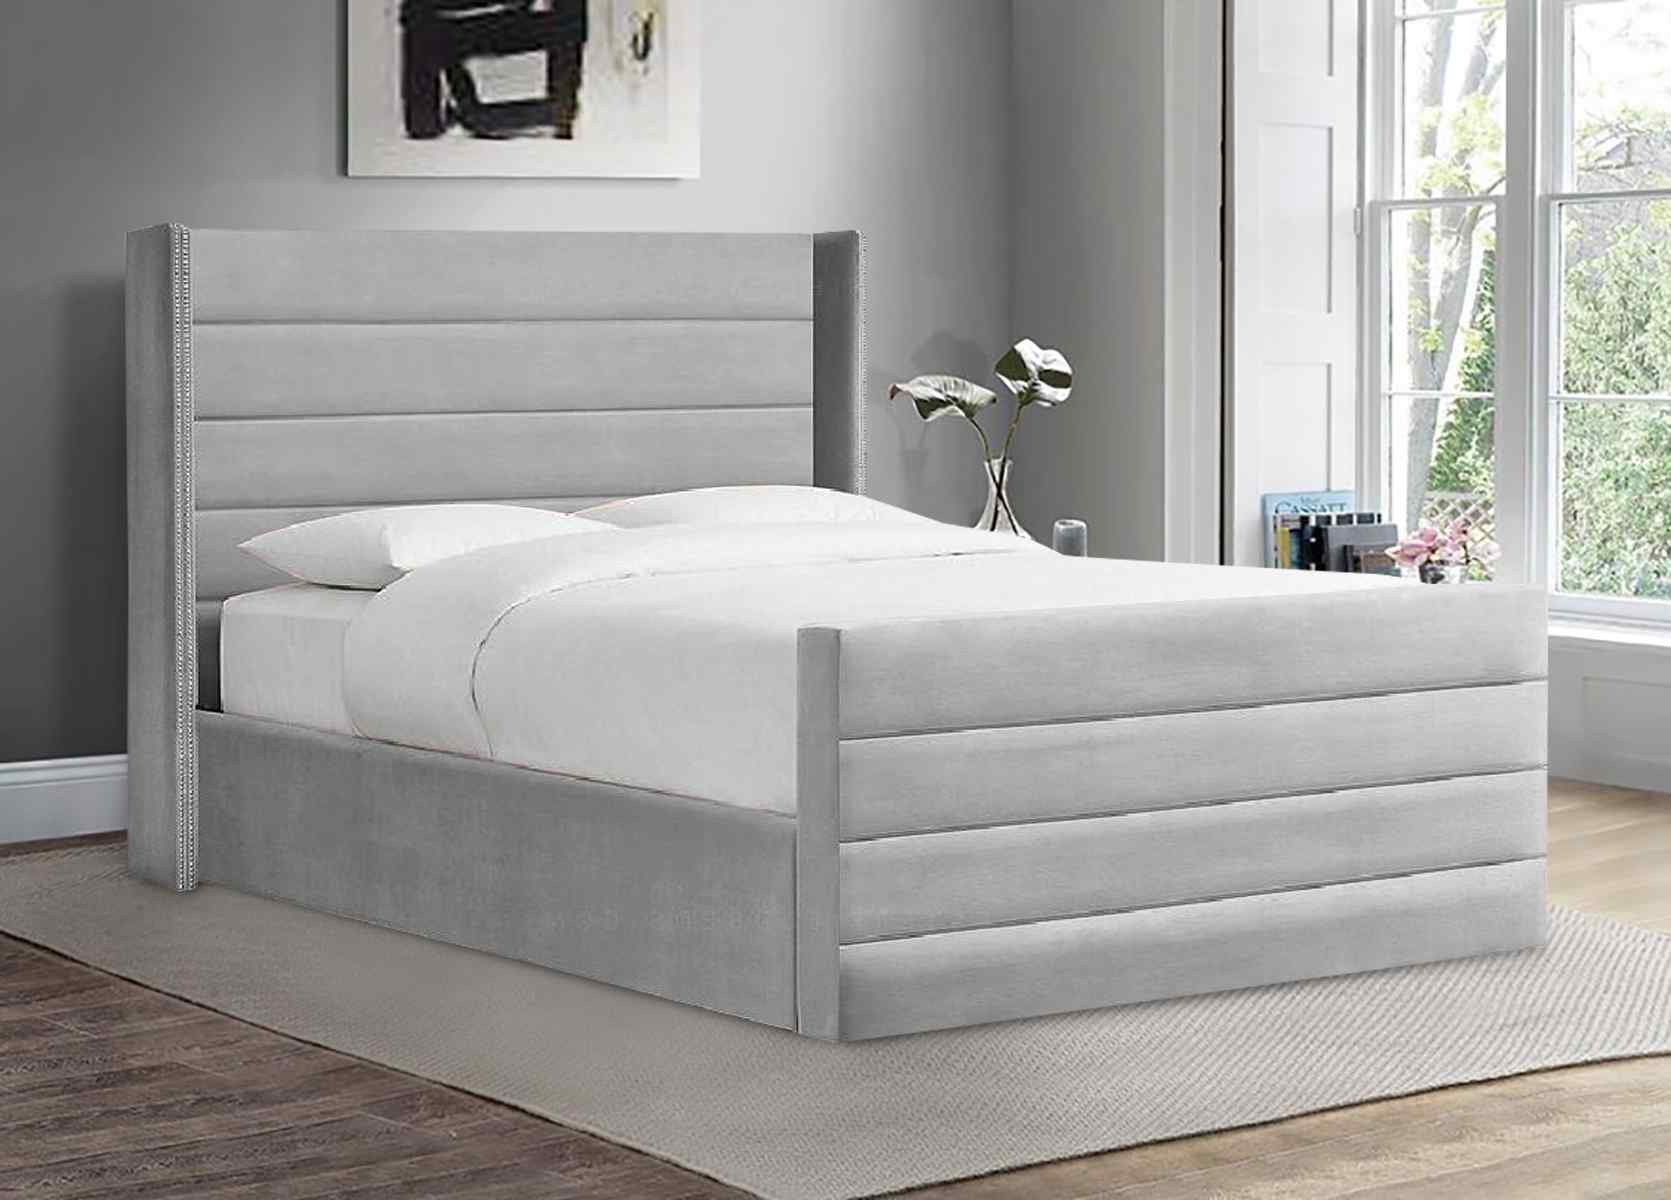 Envisage Fabric Bed Single 90cm 3ft / Silver Enzo Bed Frame Soft Plush Velvet - choice of colours envisage Bed Kings